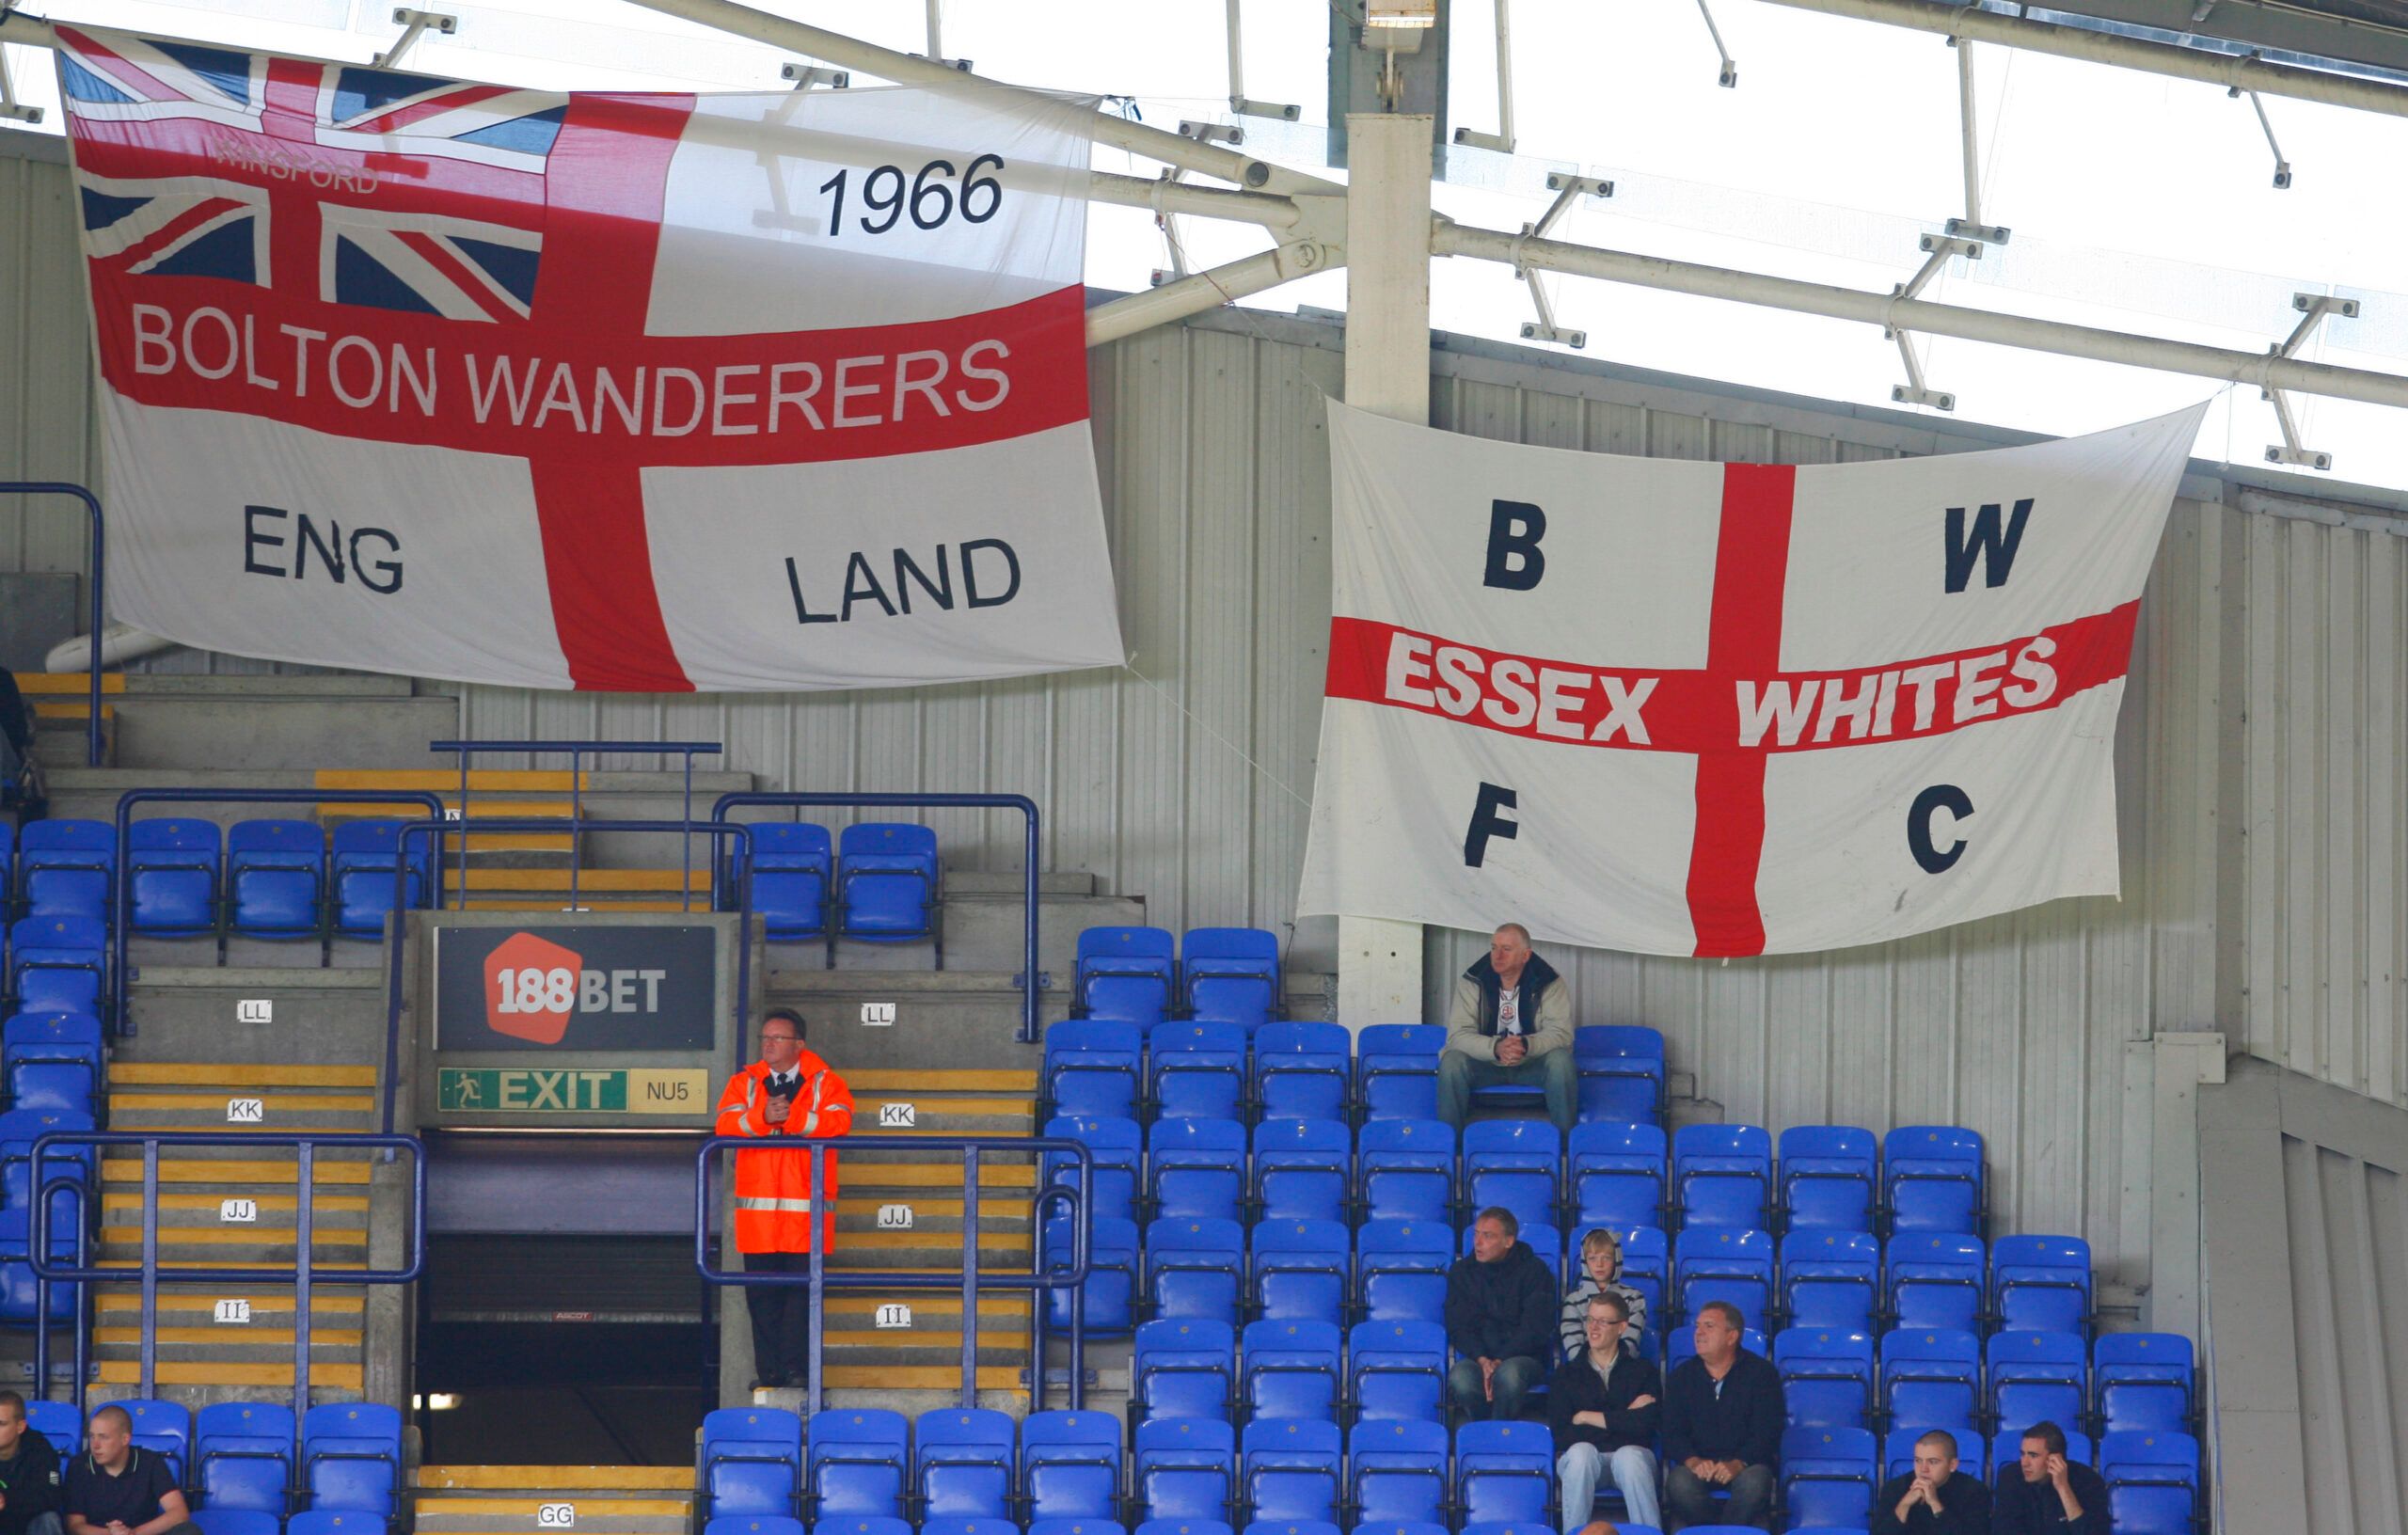 Football - Bolton Wanderers v Birmingham City - Barclays Premier League - The Reebok Stadium - 10/11 - 29/8/10 
General view of Bolton Wanderers banners and flags in stand 
Mandatory Credit: Action Images / Paul Thomas 
NO ONLINE/INTERNET USE WITHOUT A LICENCE FROM THE FOOTBALL DATA CO LTD. FOR LICENCE ENQUIRIES PLEASE TELEPHONE +44 (0) 207 864 9000.